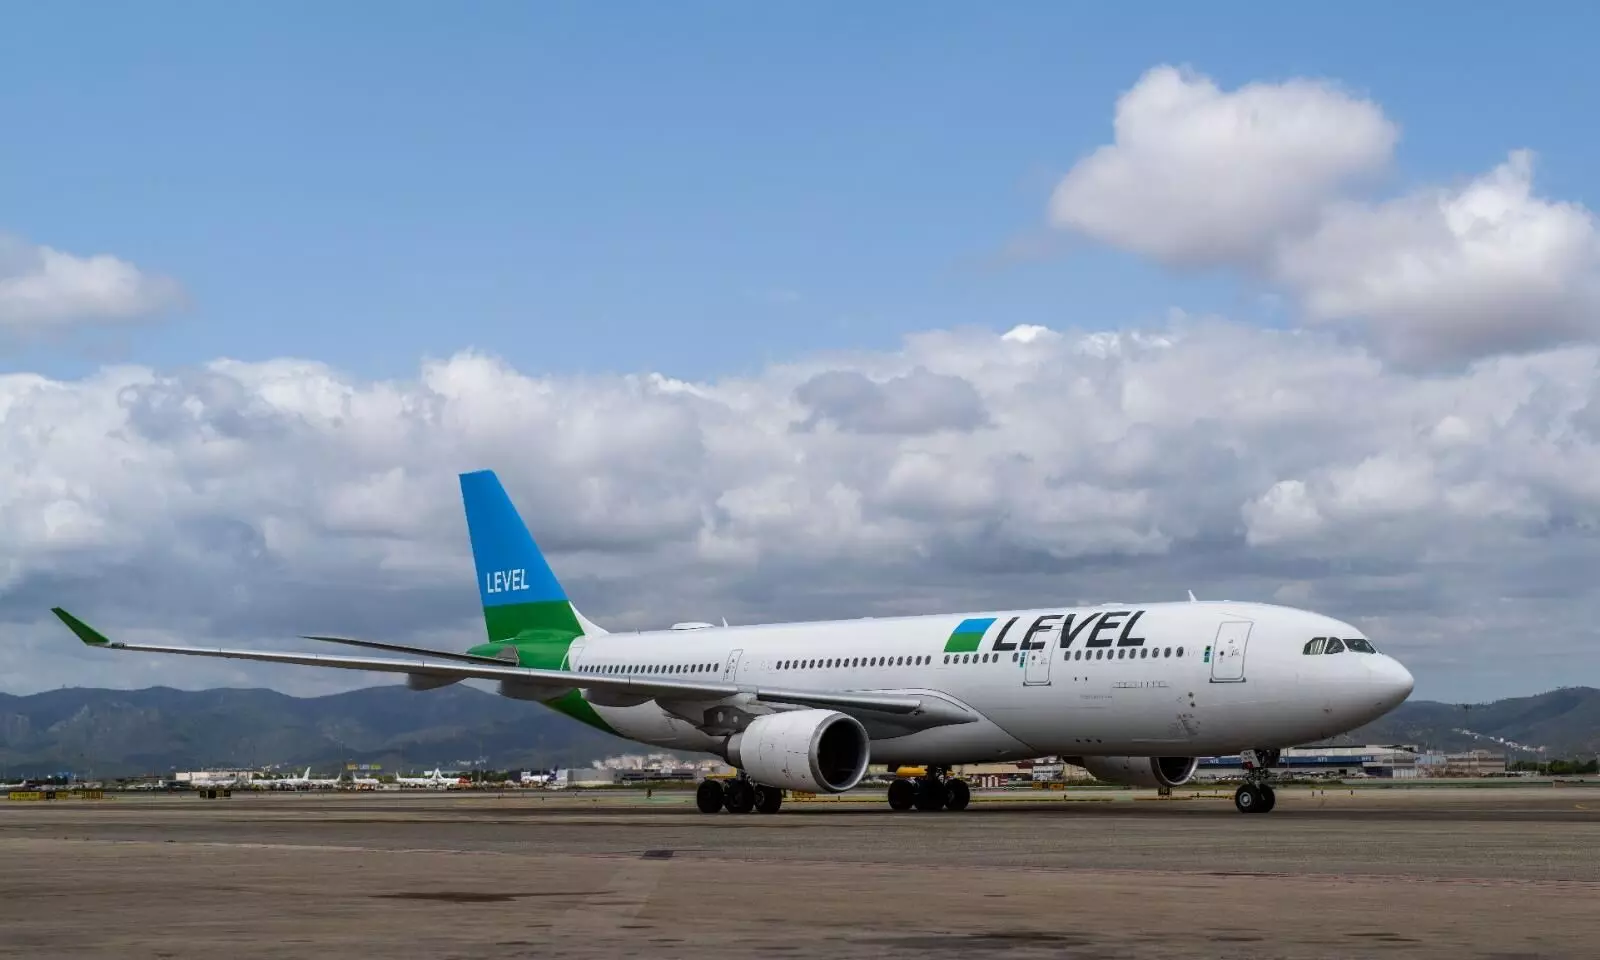 IAG Cargo launches new service between Barcelona and Miami